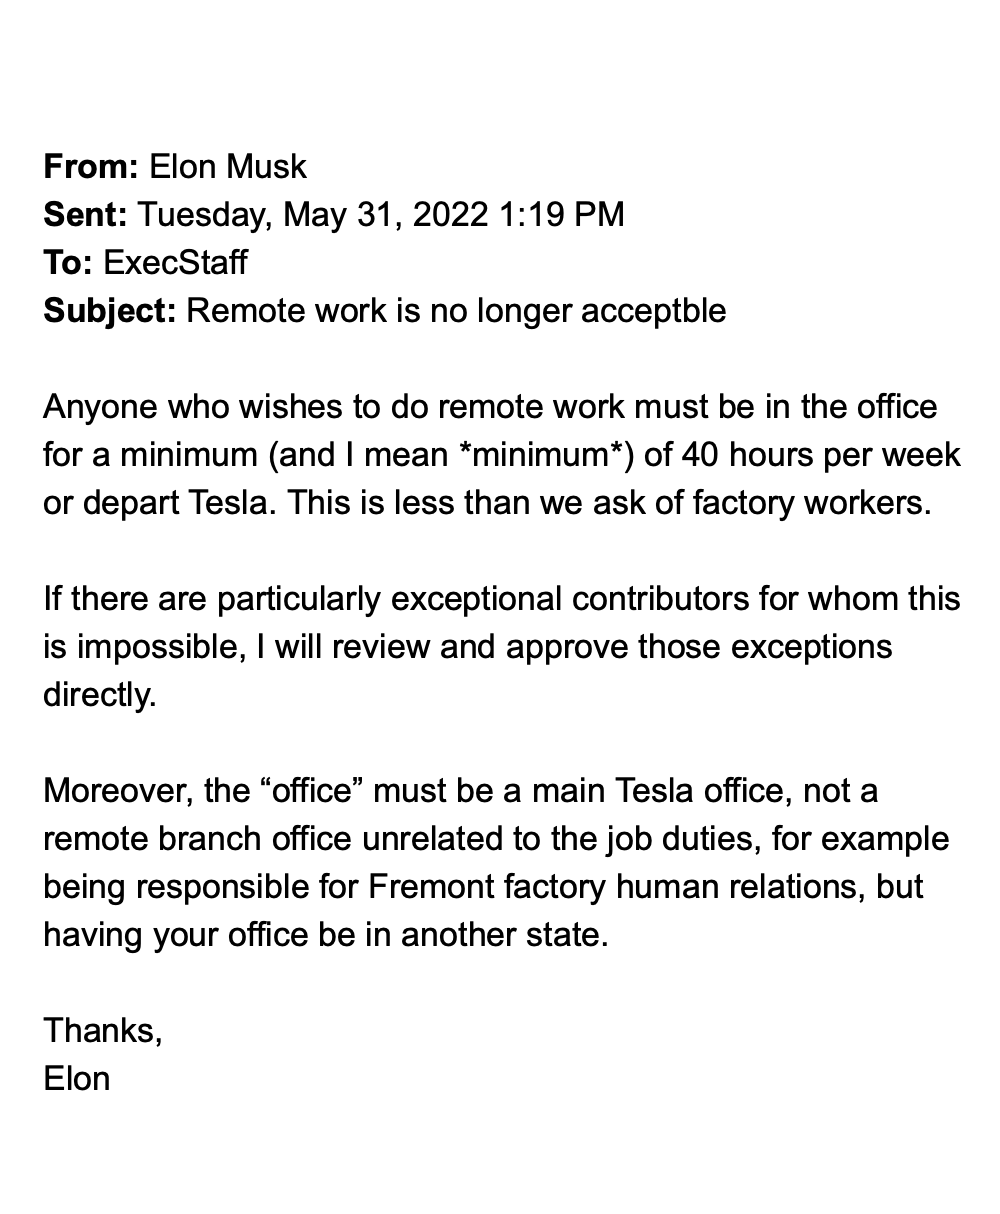 Internal Tech Emails on Twitter: "Elon Musk on remote work May 31, 2022  https://t.co/gTw1Bdh18h" / Twitter